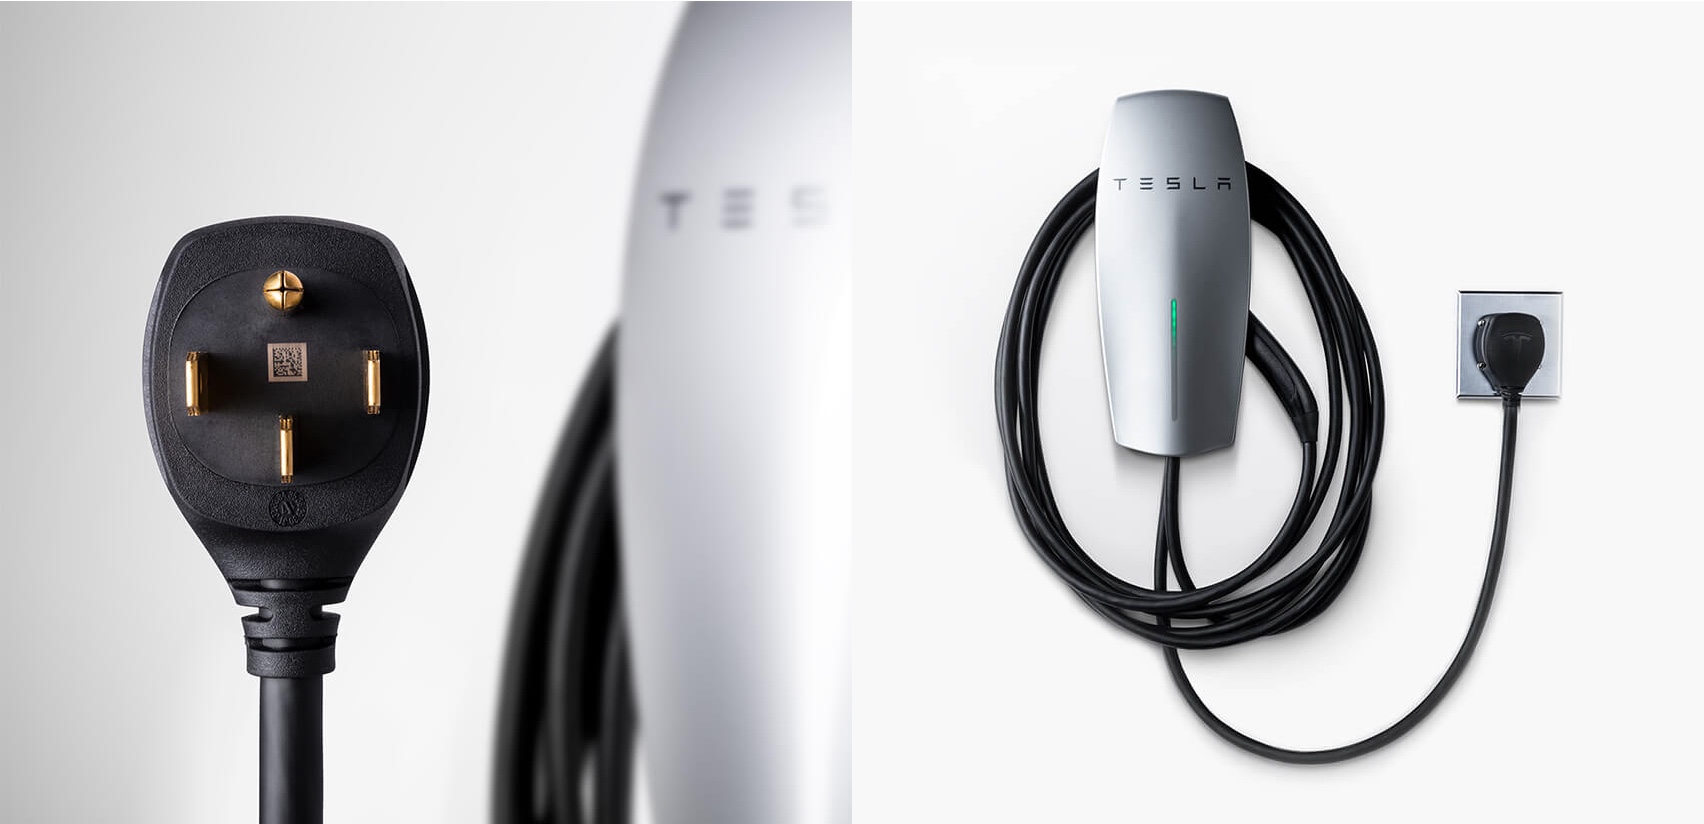 Tesla launches new Wall Connector with NEMA 14-50 plug